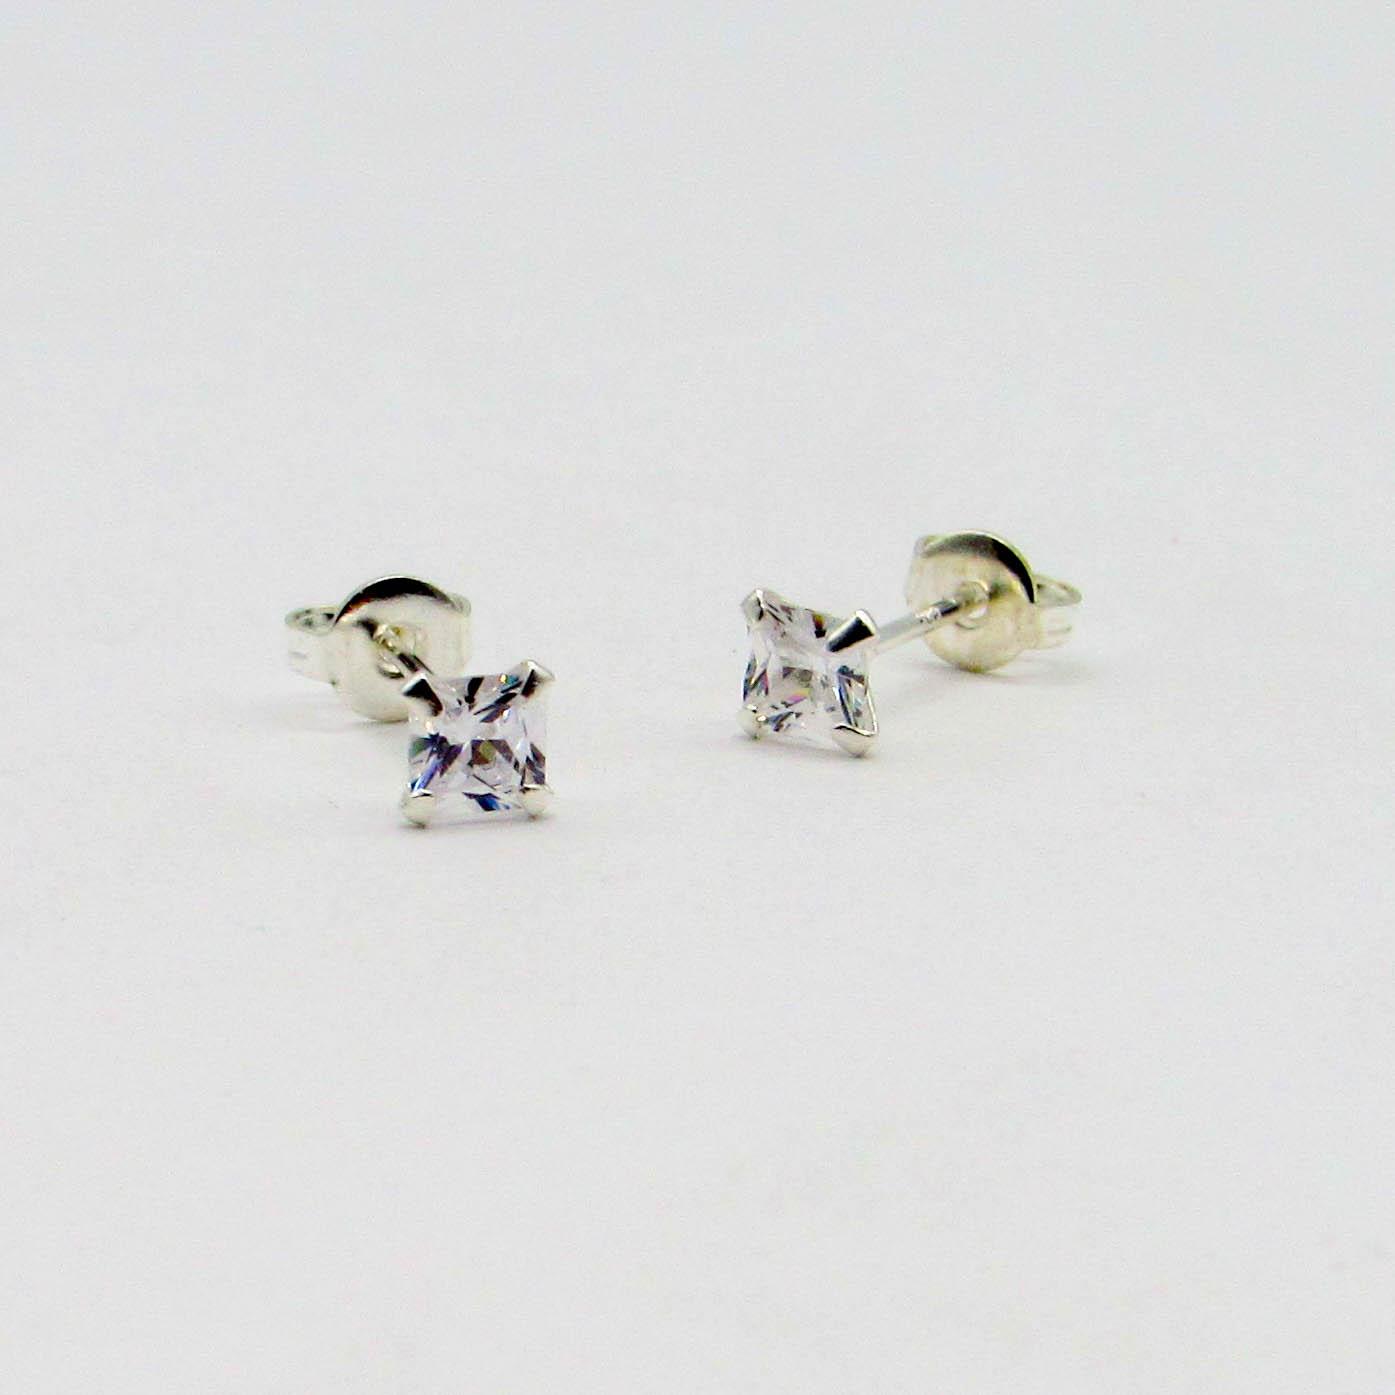 AROS CUBIC 4x4MM GRIFAS /PLATA